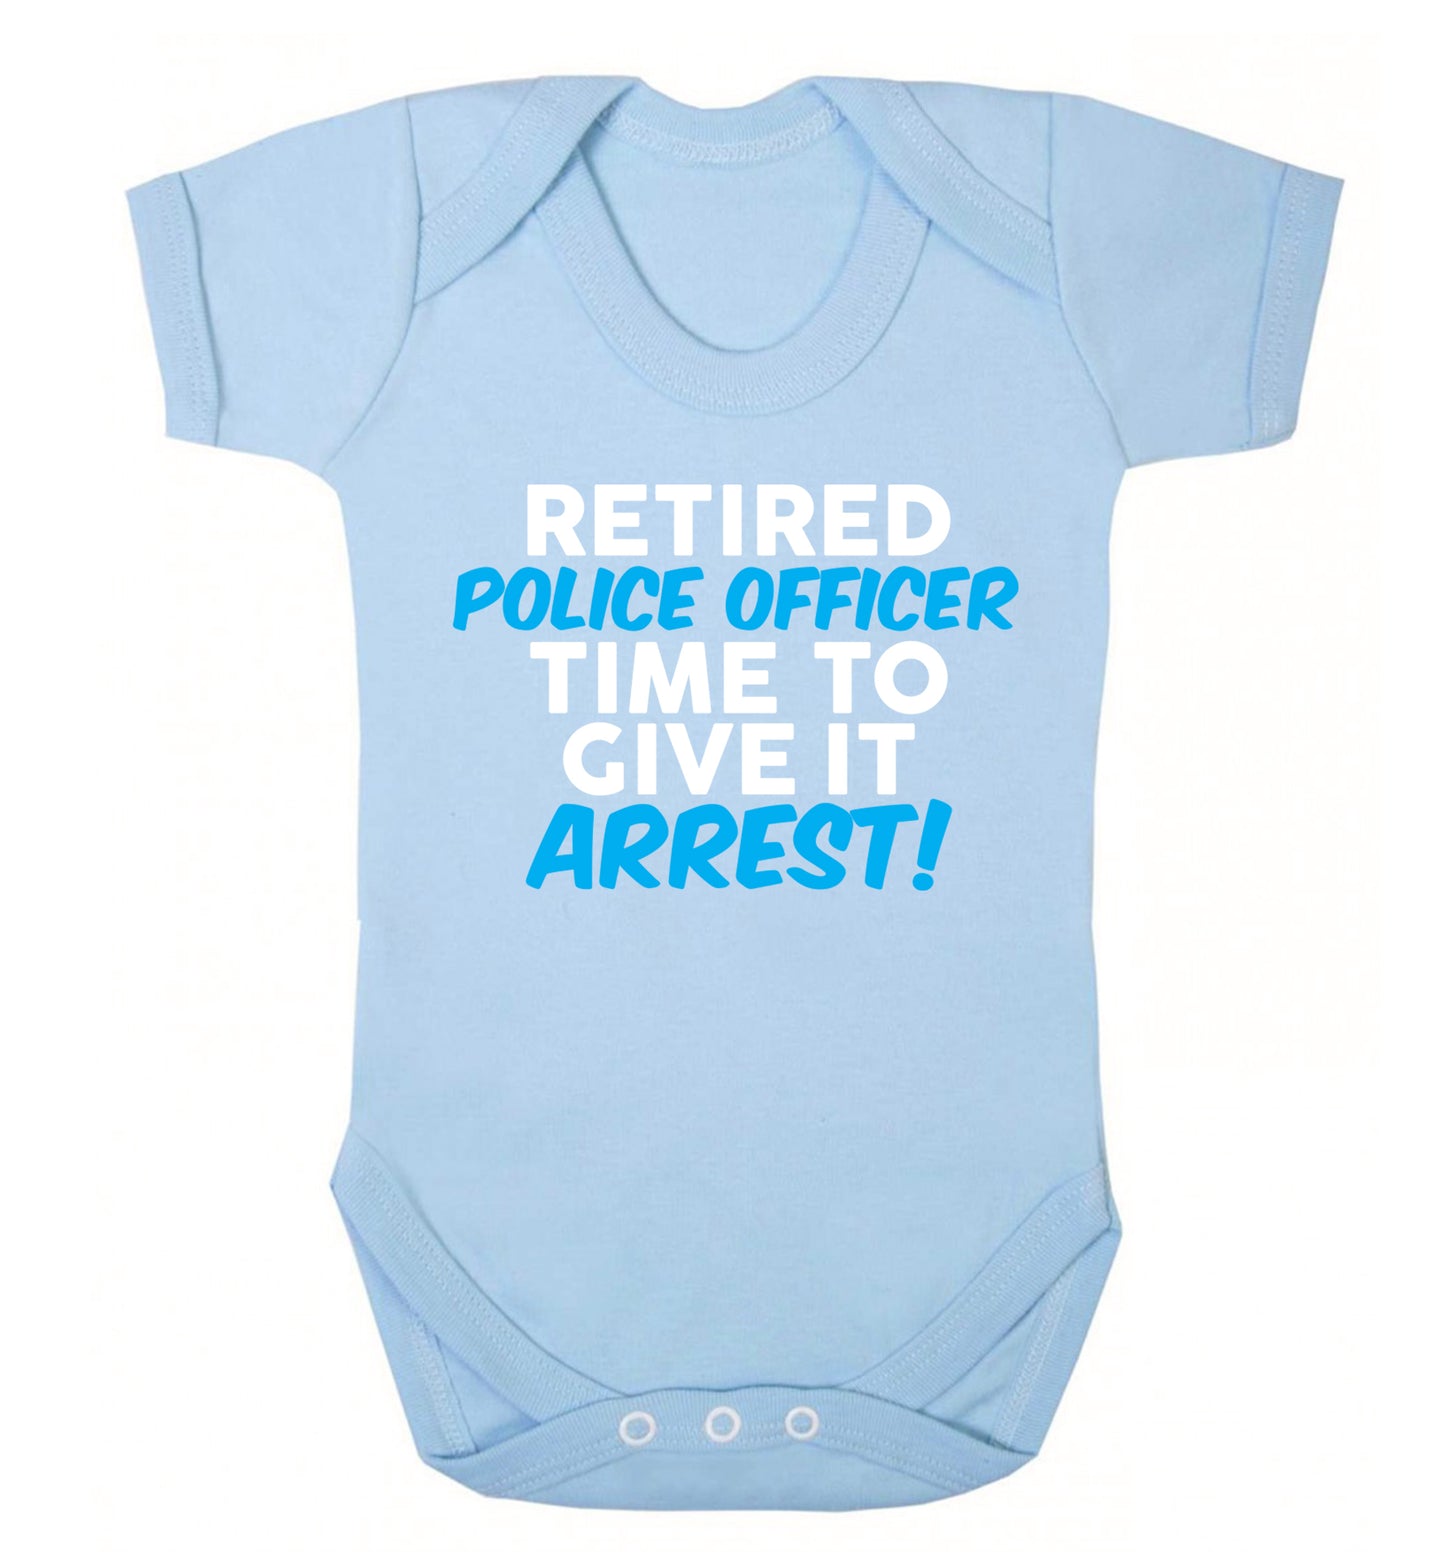 Retired police officer time to give it arrest Baby Vest pale blue 18-24 months